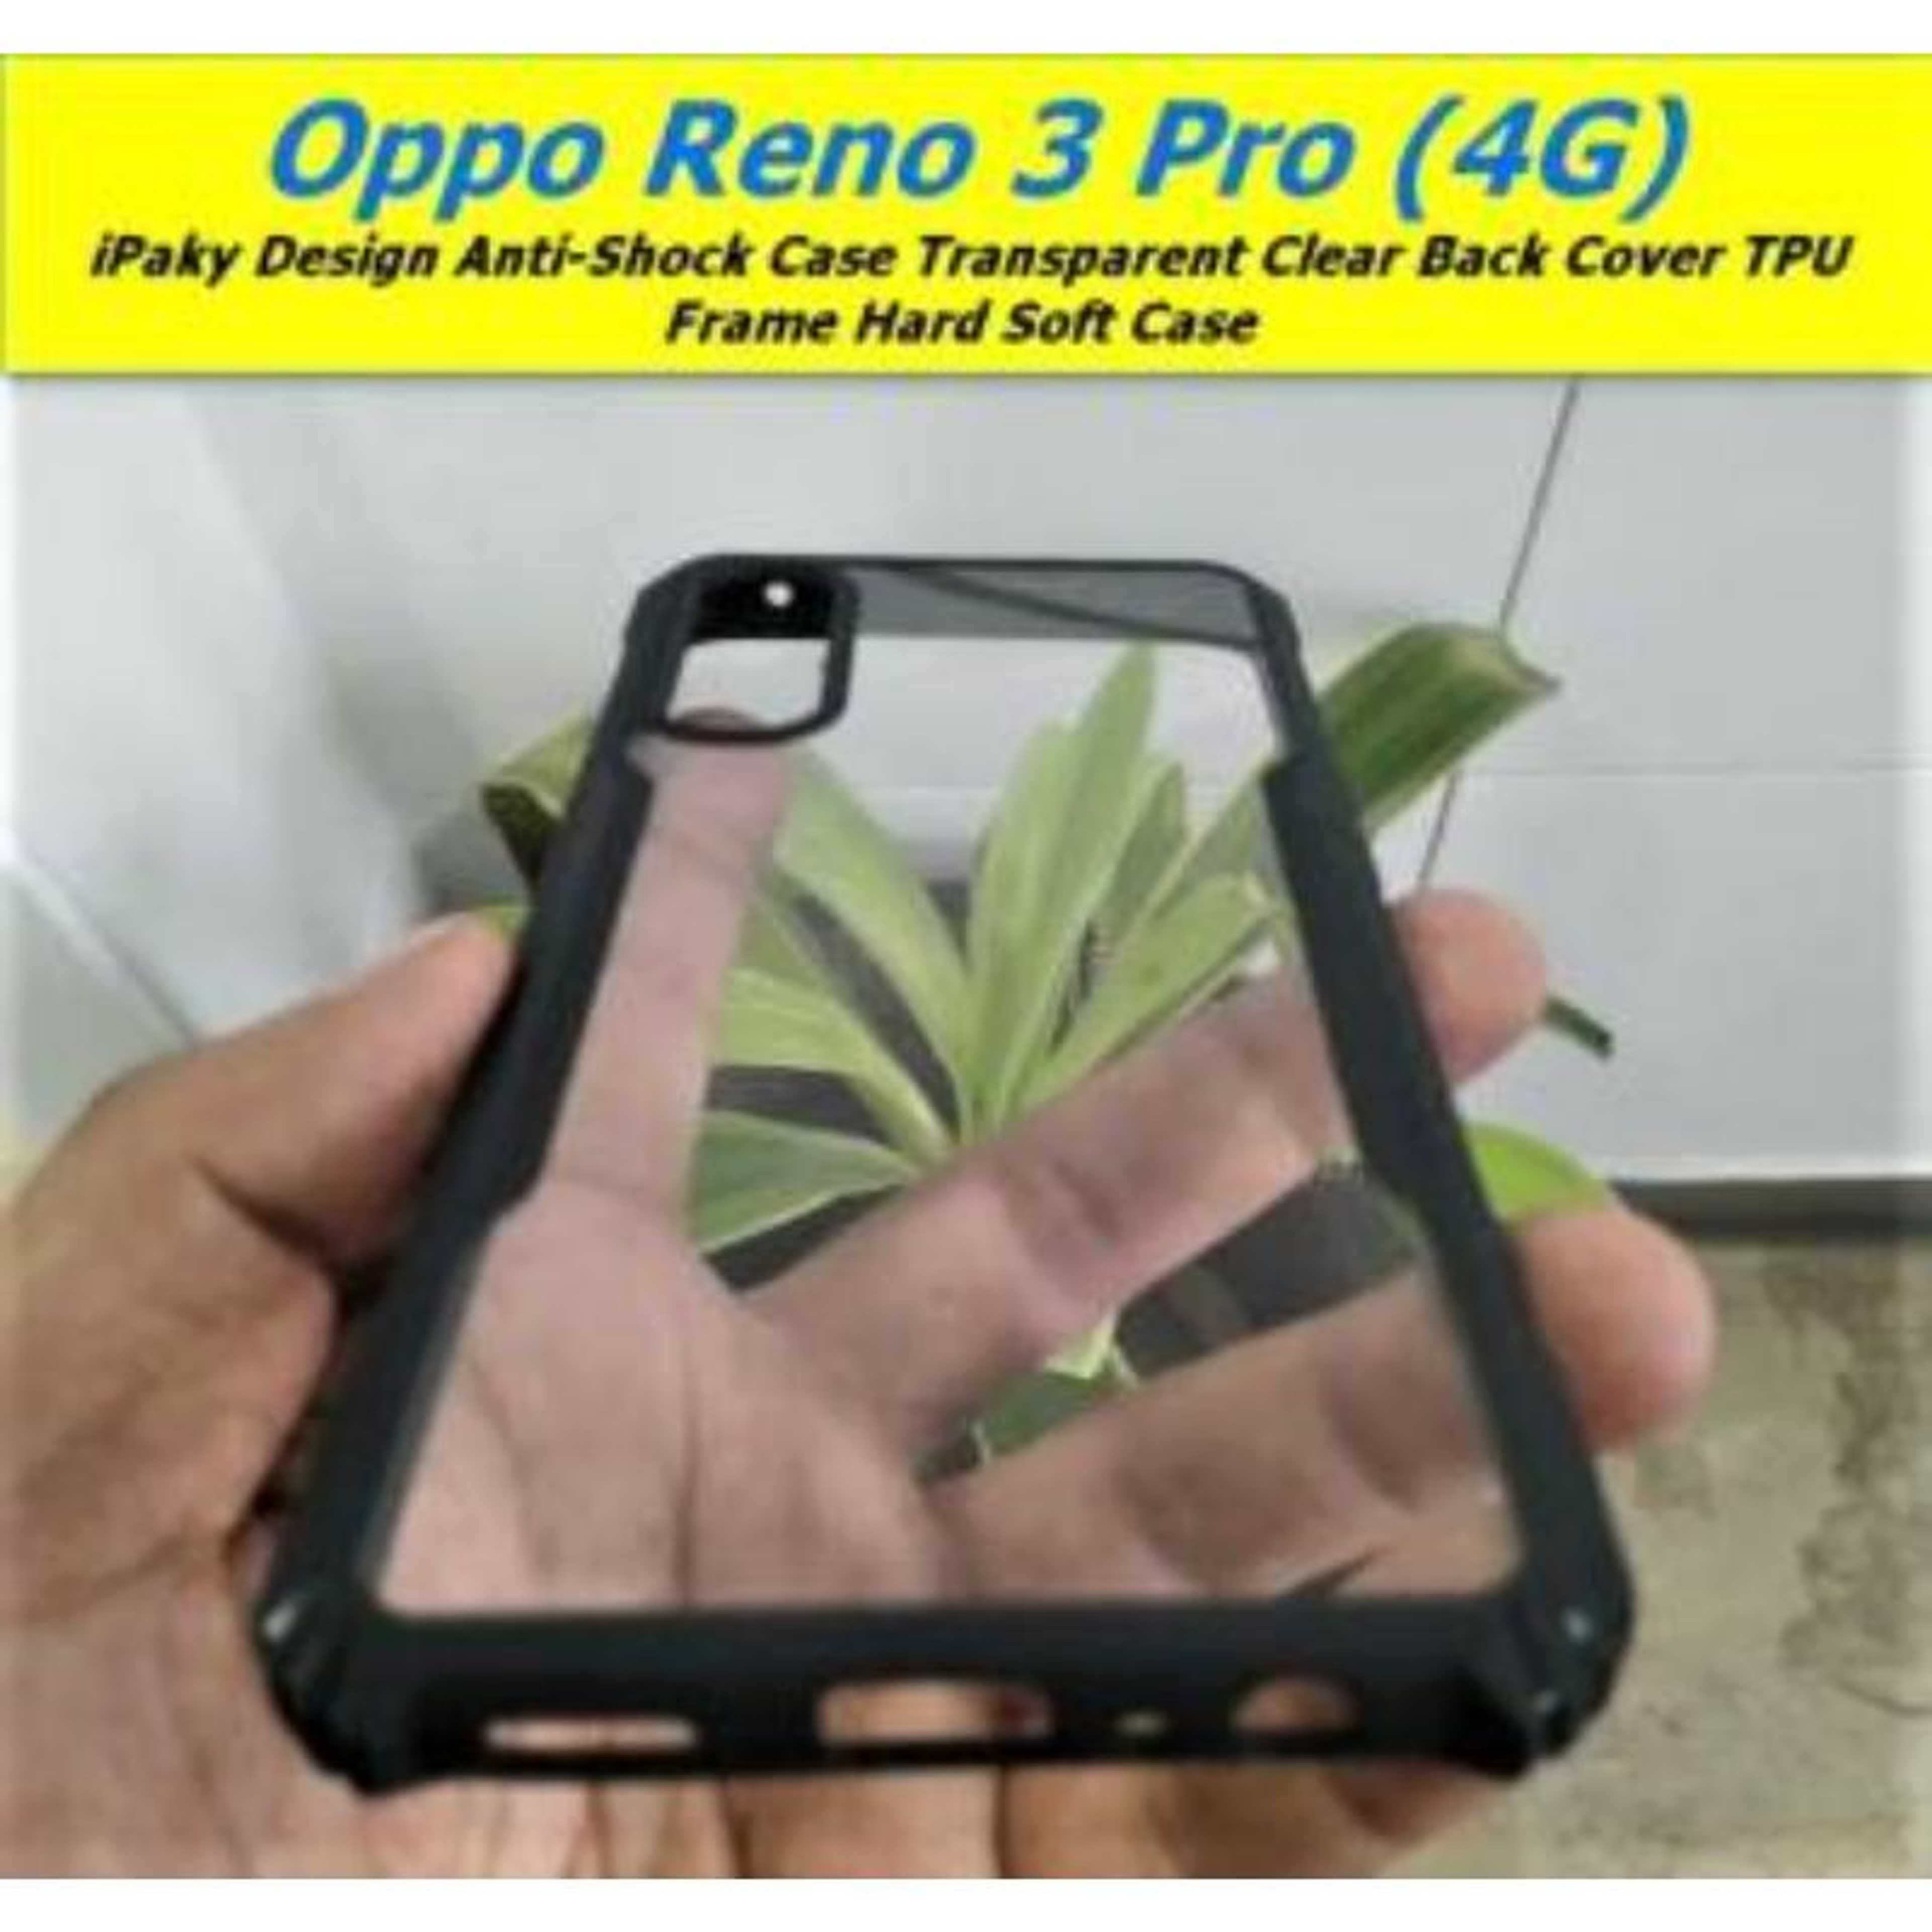 For Oppo_RENO 3 Pro iPaky Design Anti-Shock Case Transparent Clear Back Cover TPU Frame Hard Soft Case